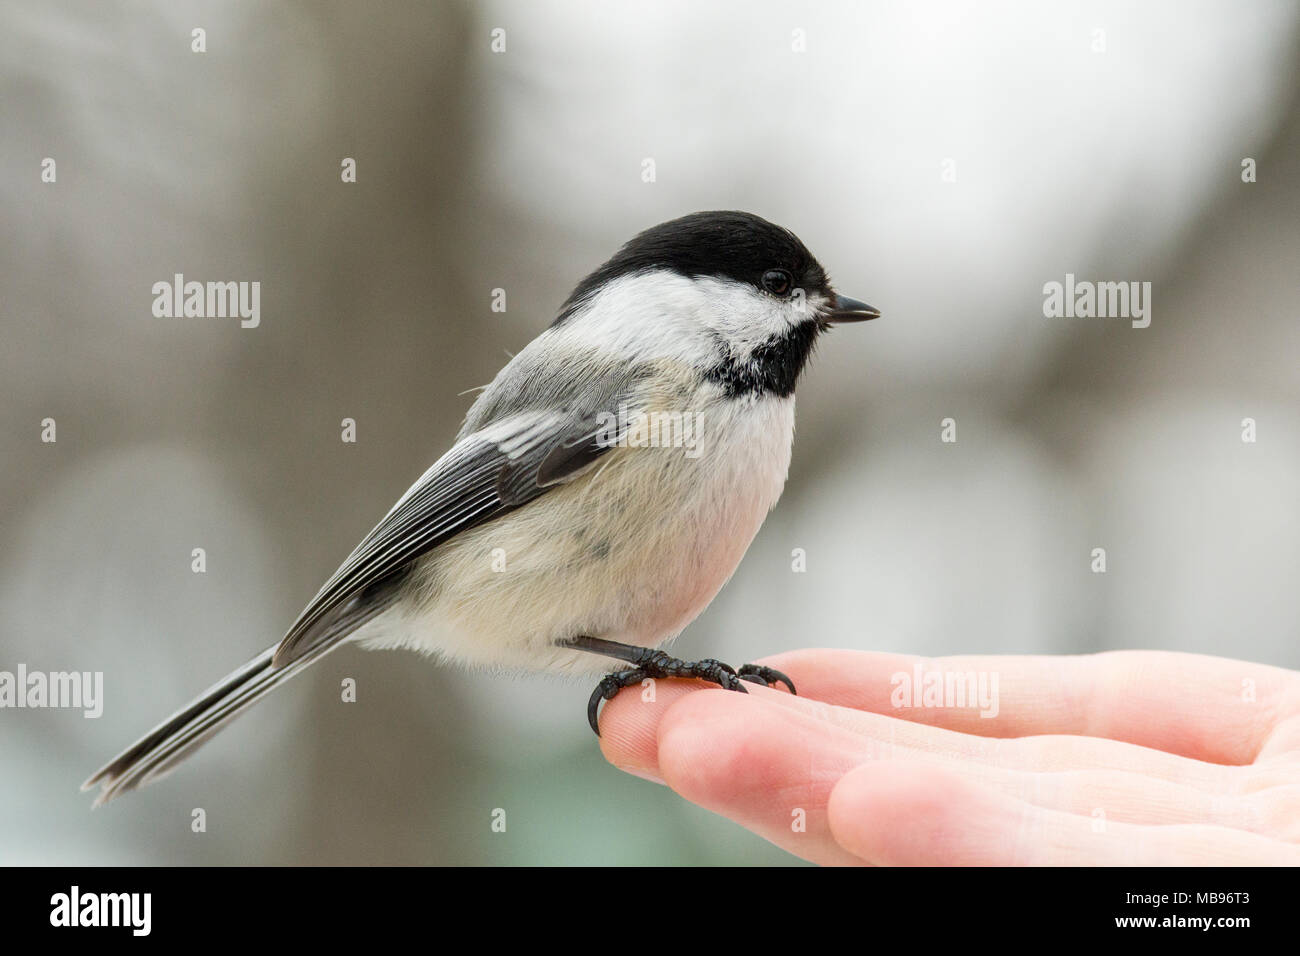 Black-capped chickadee (Poecile atricapillus) perched on hand expecting food Stock Photo